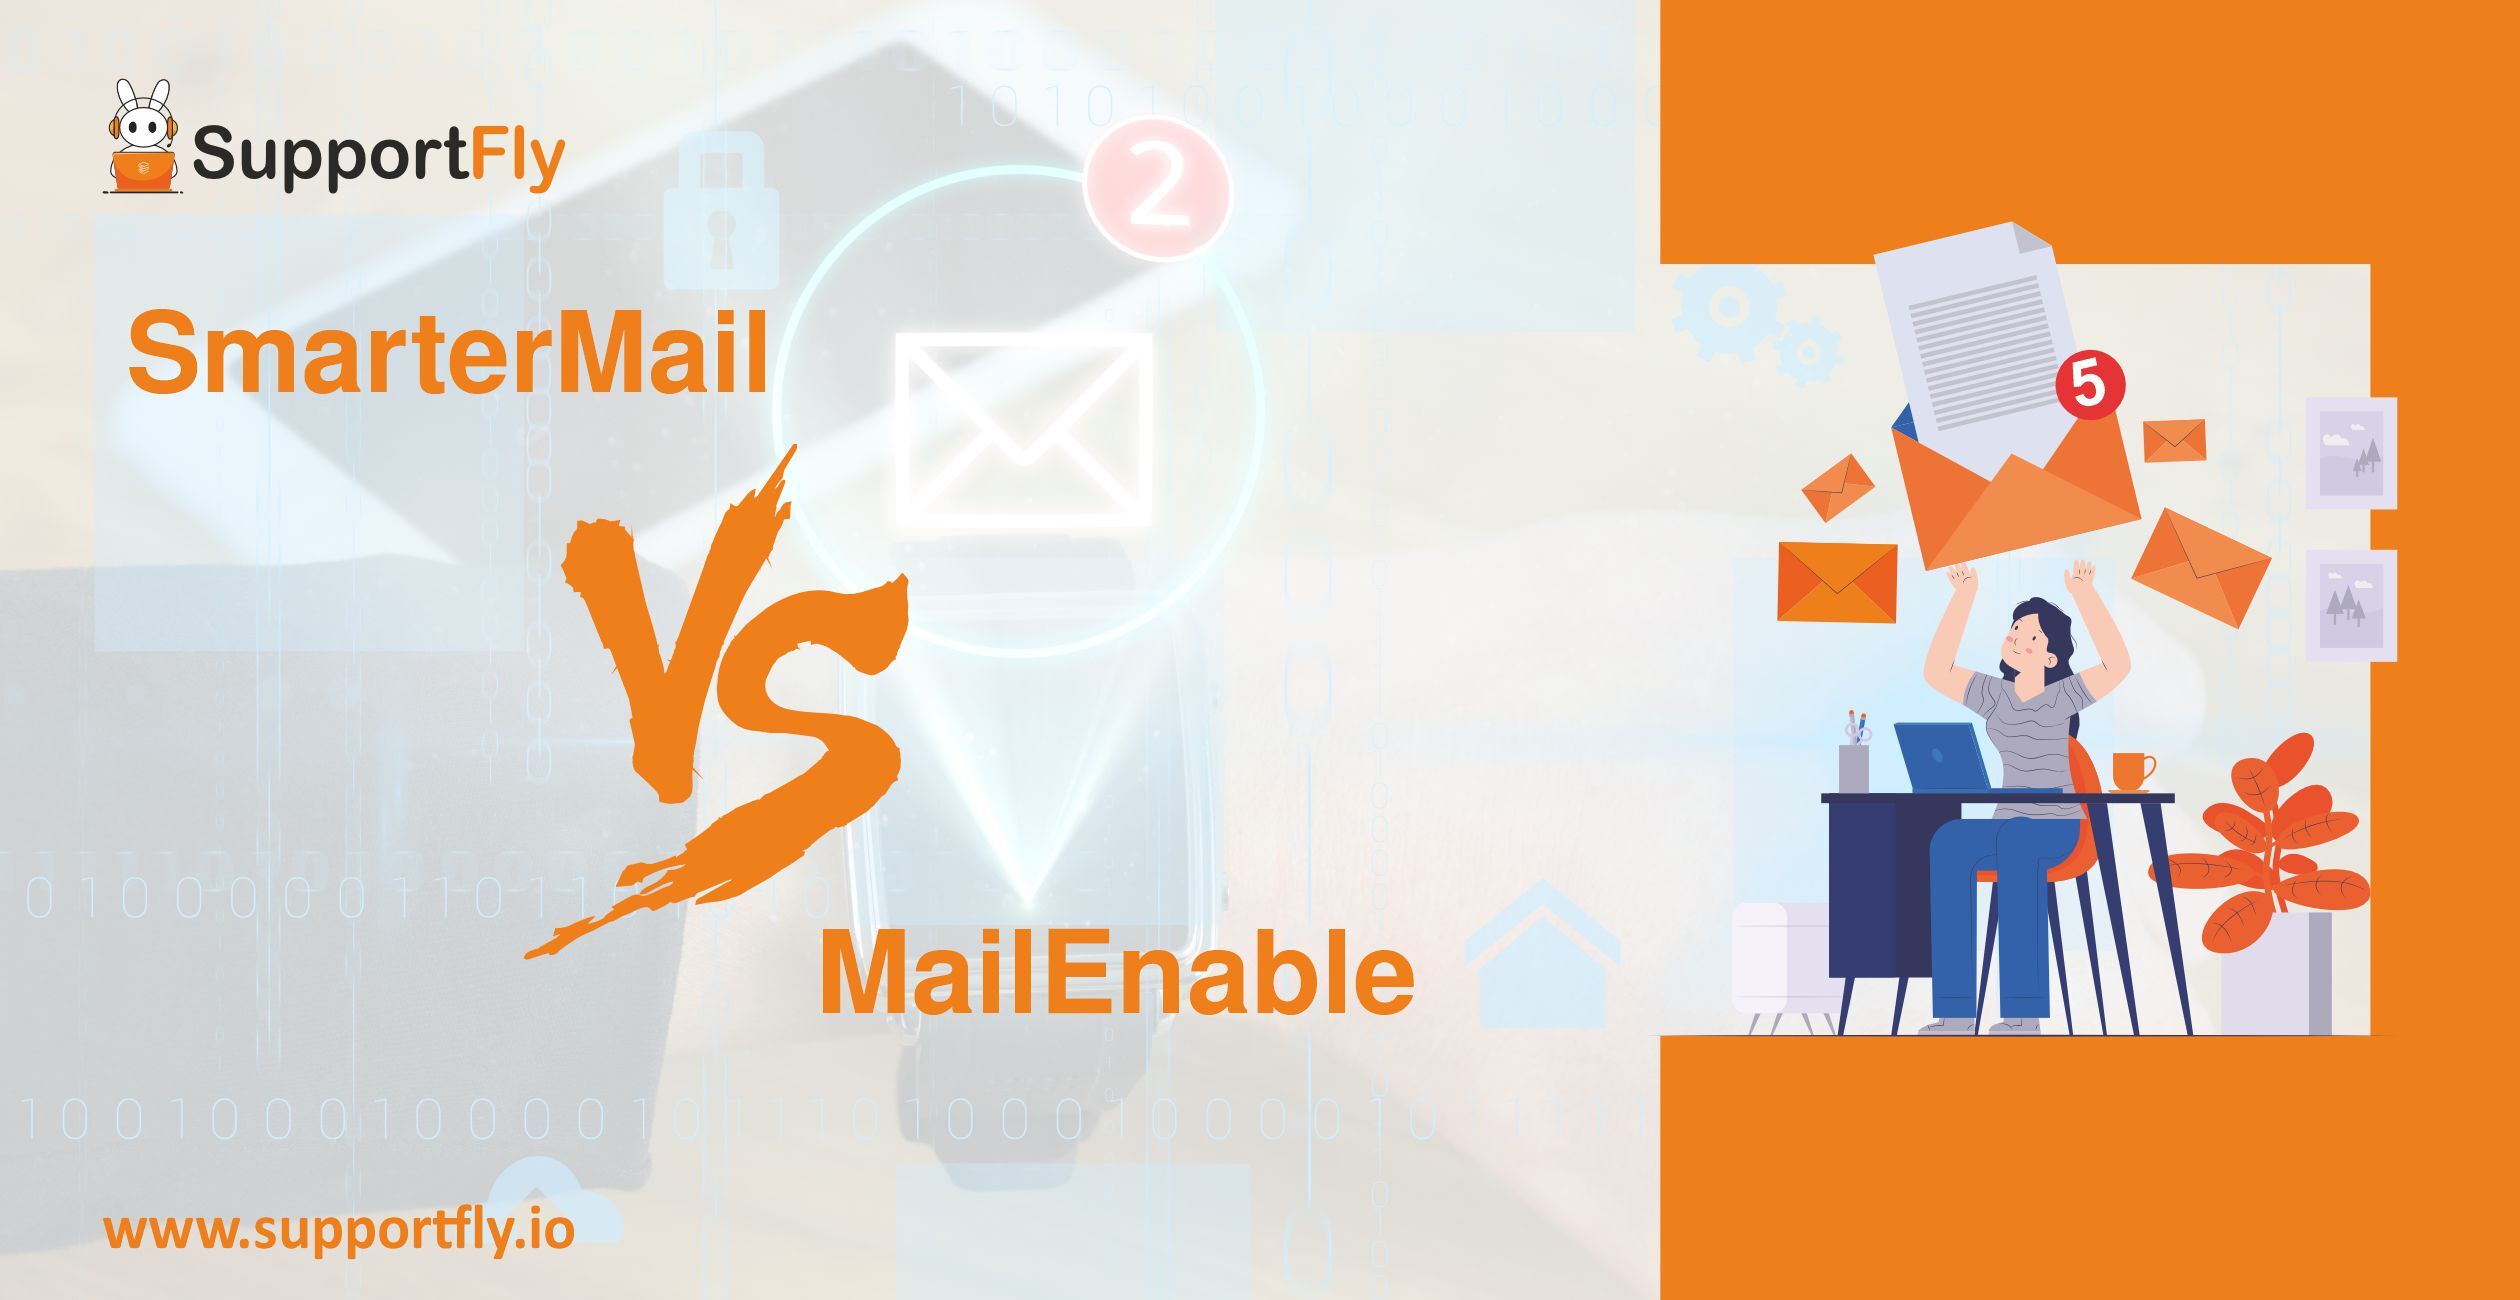 Smarter mail vs Mailenable